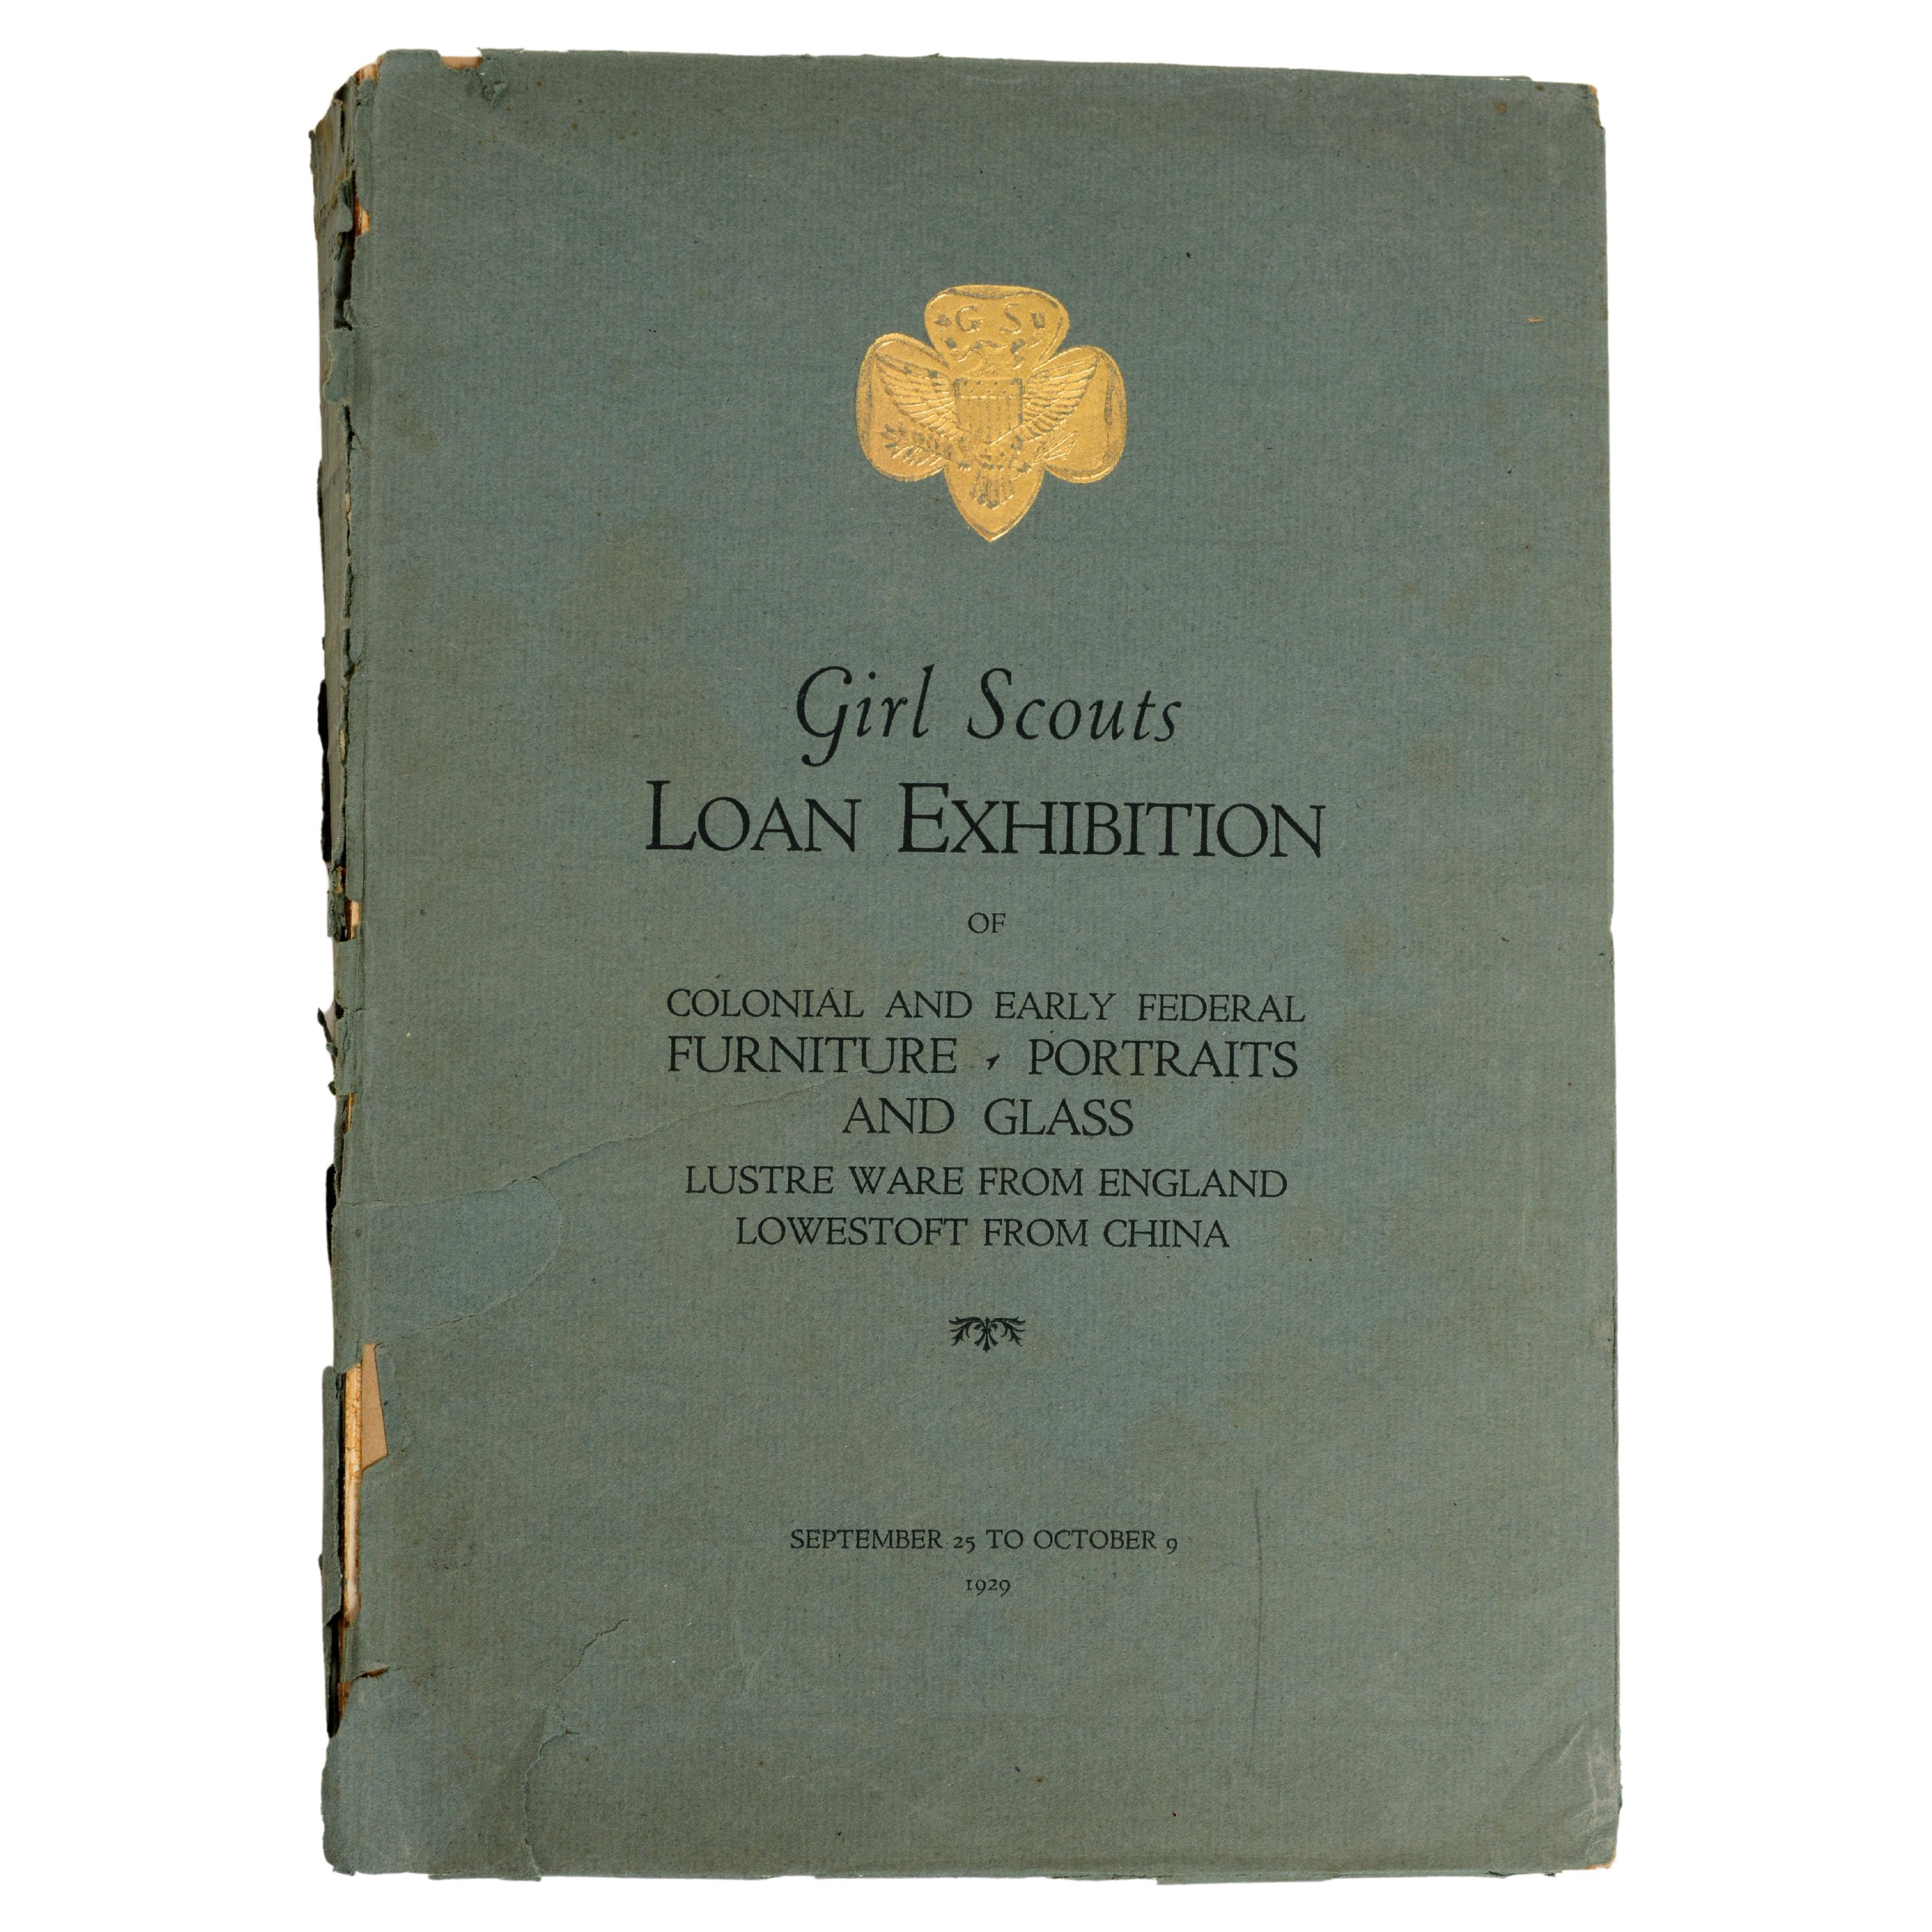 Girl Scouts Loan Exhibition of Colonial and Early Federal Furniture, 1. Hrsg. 1929